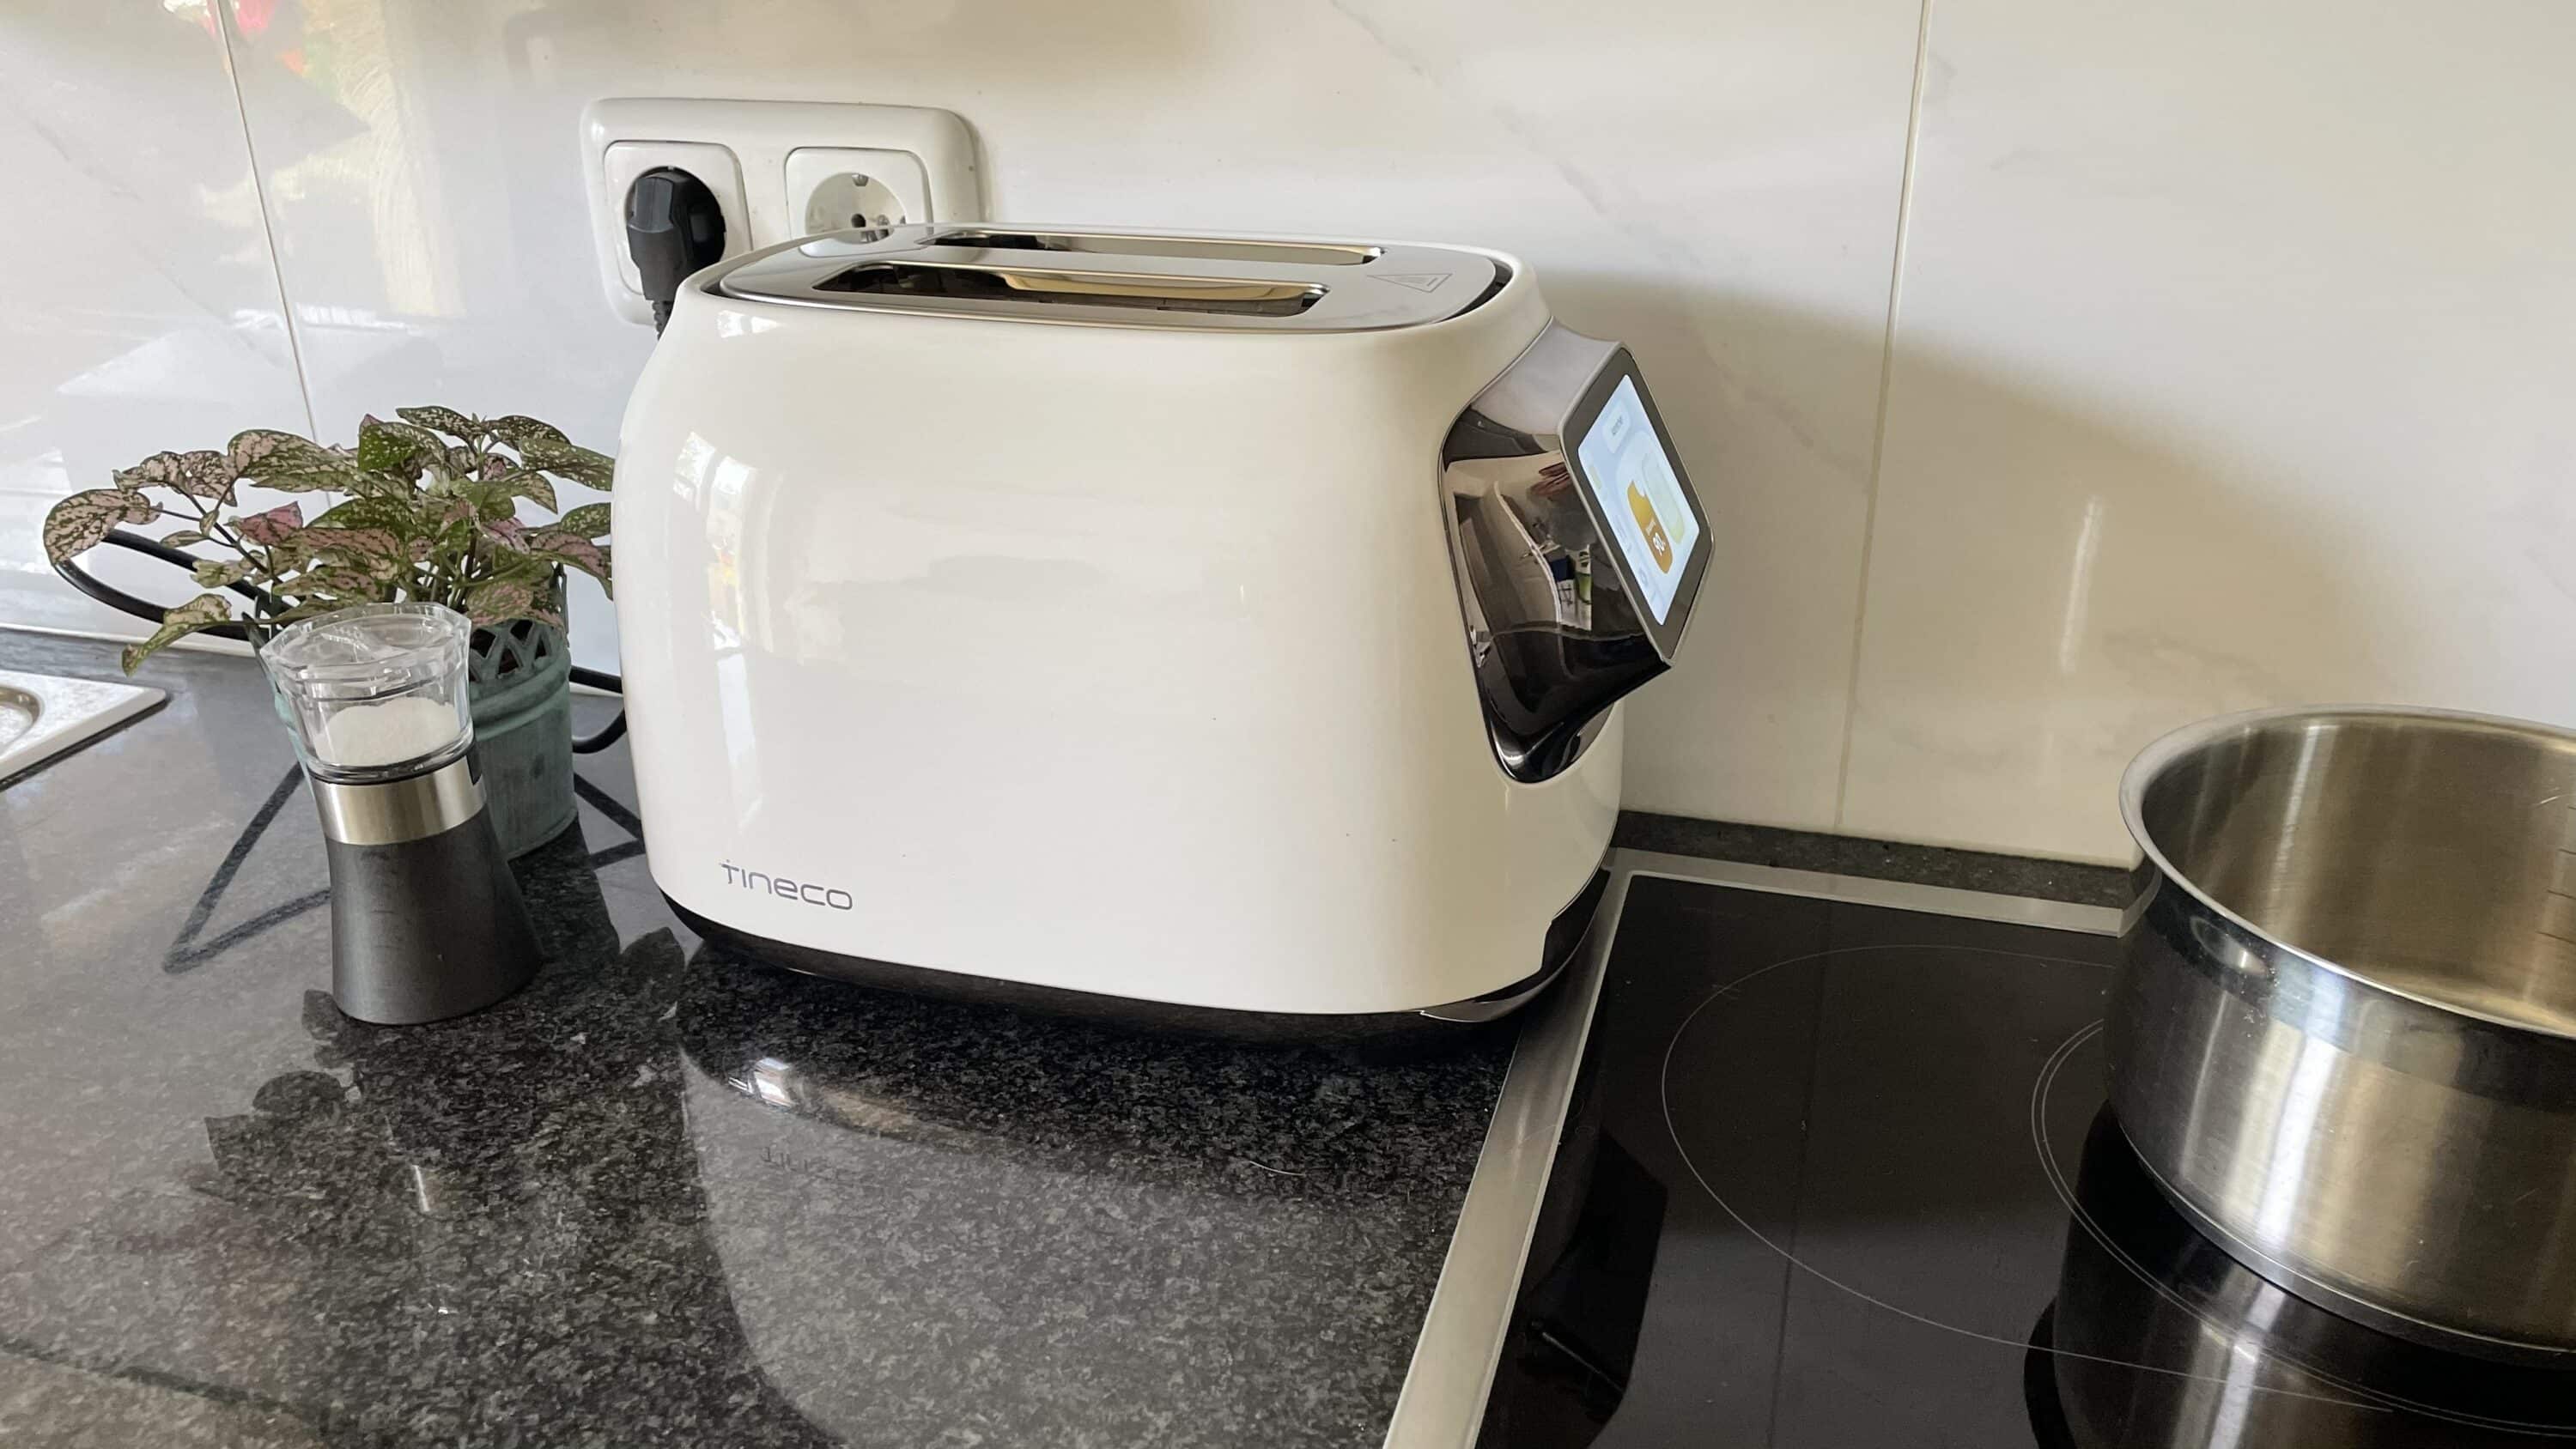 Tineco Toasty One test: The toaster of the future?